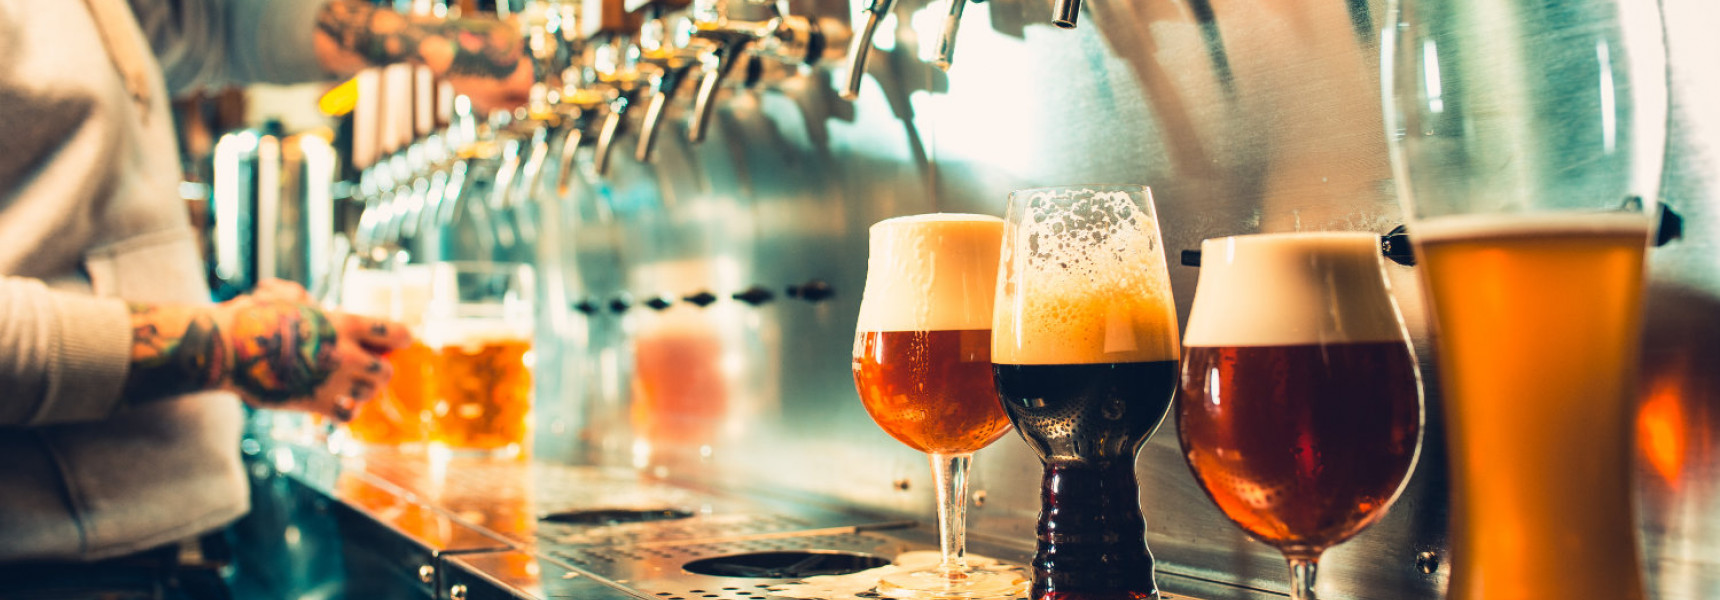 8 New Craft Beers Launching in 2020